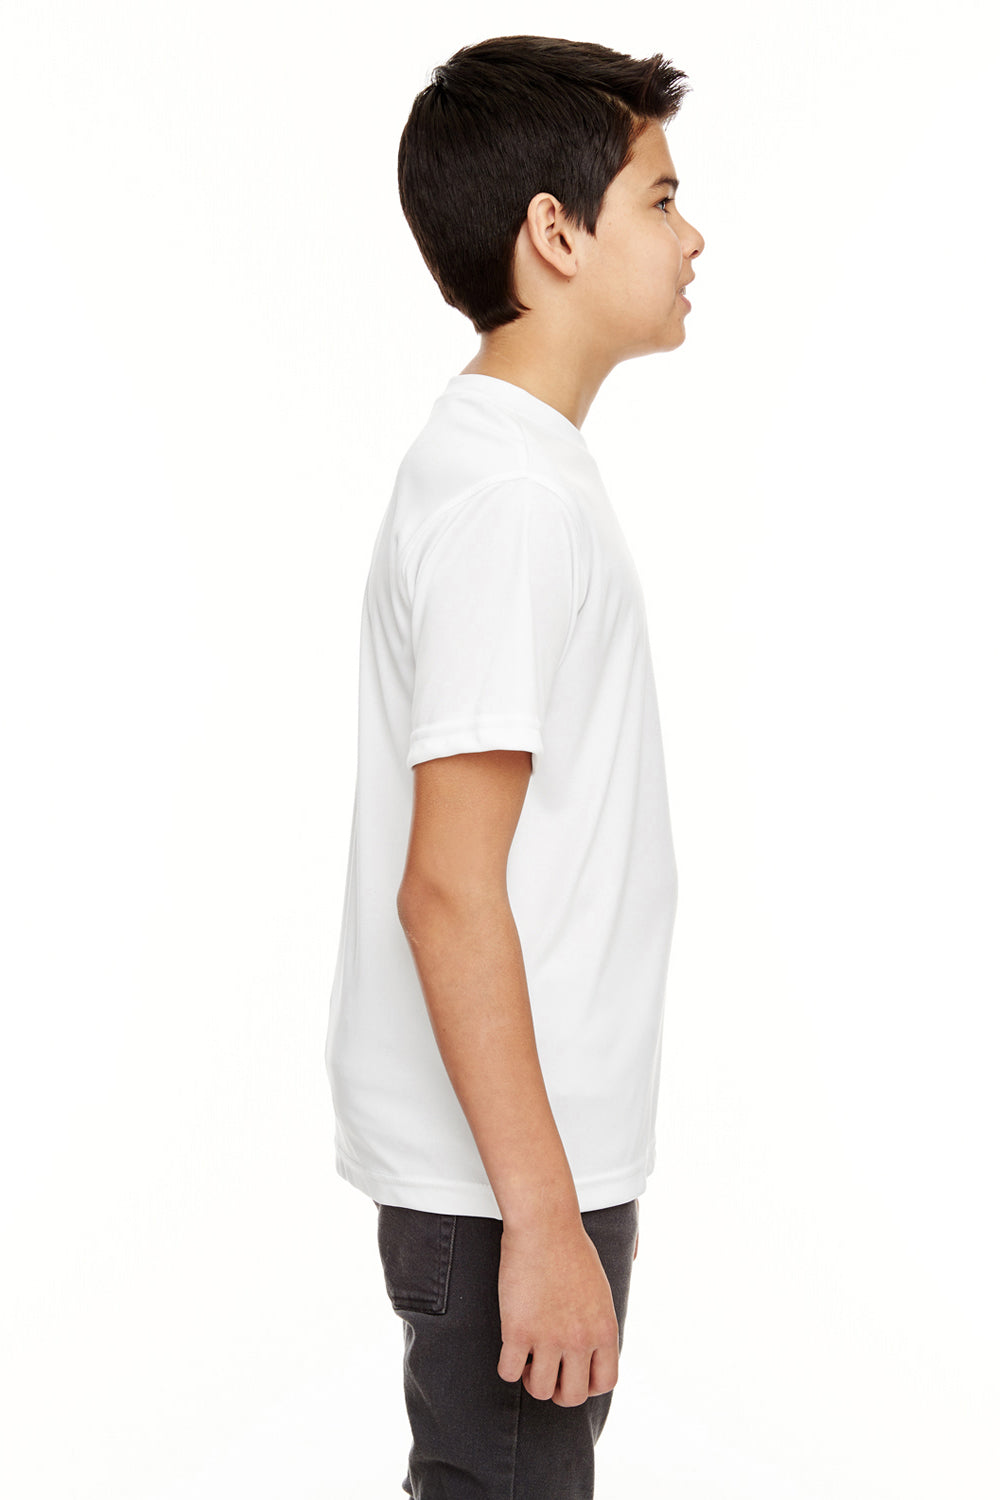 UltraClub 8620Y Youth Cool & Dry Performance Moisture Wicking Short Sleeve Crewneck T-Shirt White Side